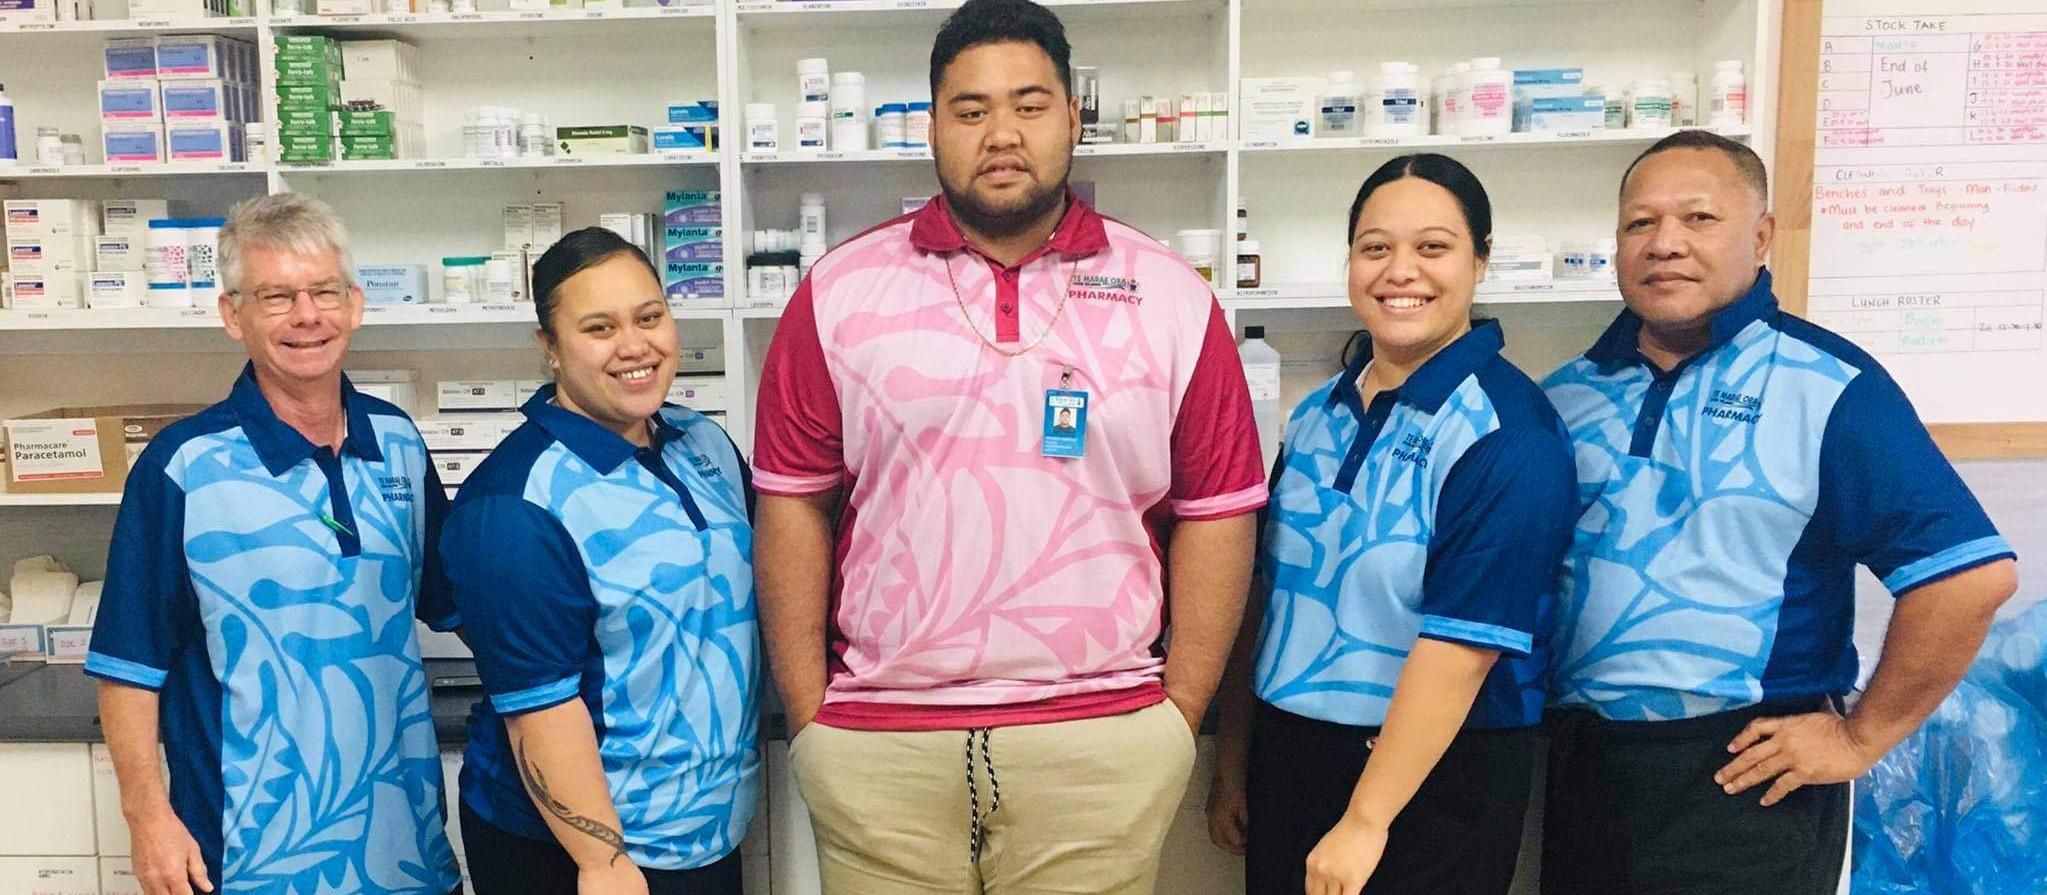 The Cooks Islands hospital pharmacy team (from left) chief pharmacist Andrew Orange, pharmacy assistants Zii Royale and Phillip Hosking, senior pharmacy technician Elizabeth Bryson and warehouse manager Glassie Matata 